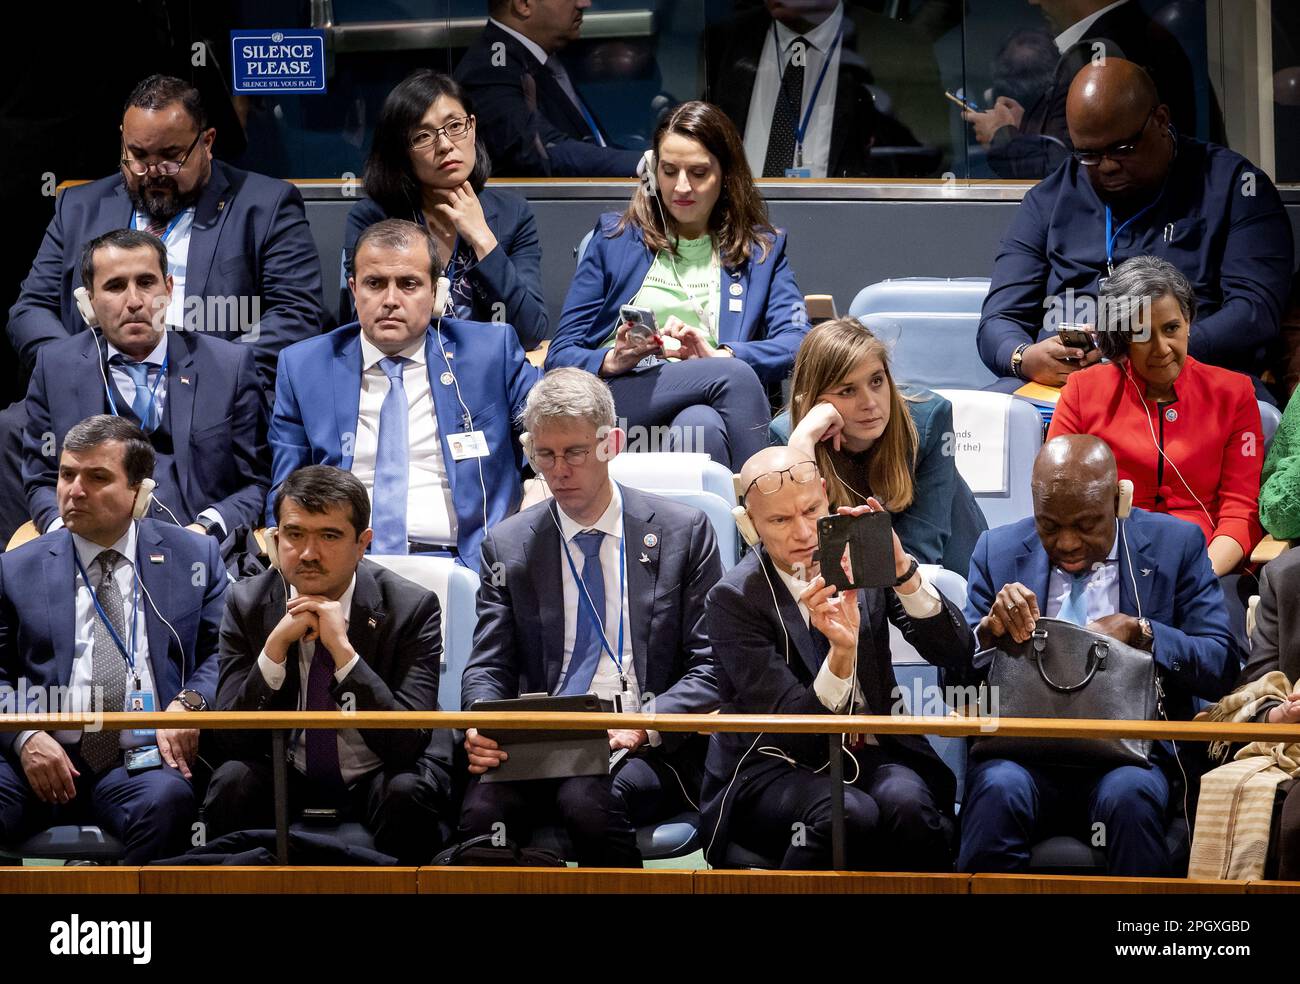 NEW YORK - Water envoy Henk Ovink during the conclusion of the United Nations water conference. The conference serves as a prelude to the climate summit in Dubai later this year. ANP KOEN VAN WEEL netherlands out - belgium out Stock Photo